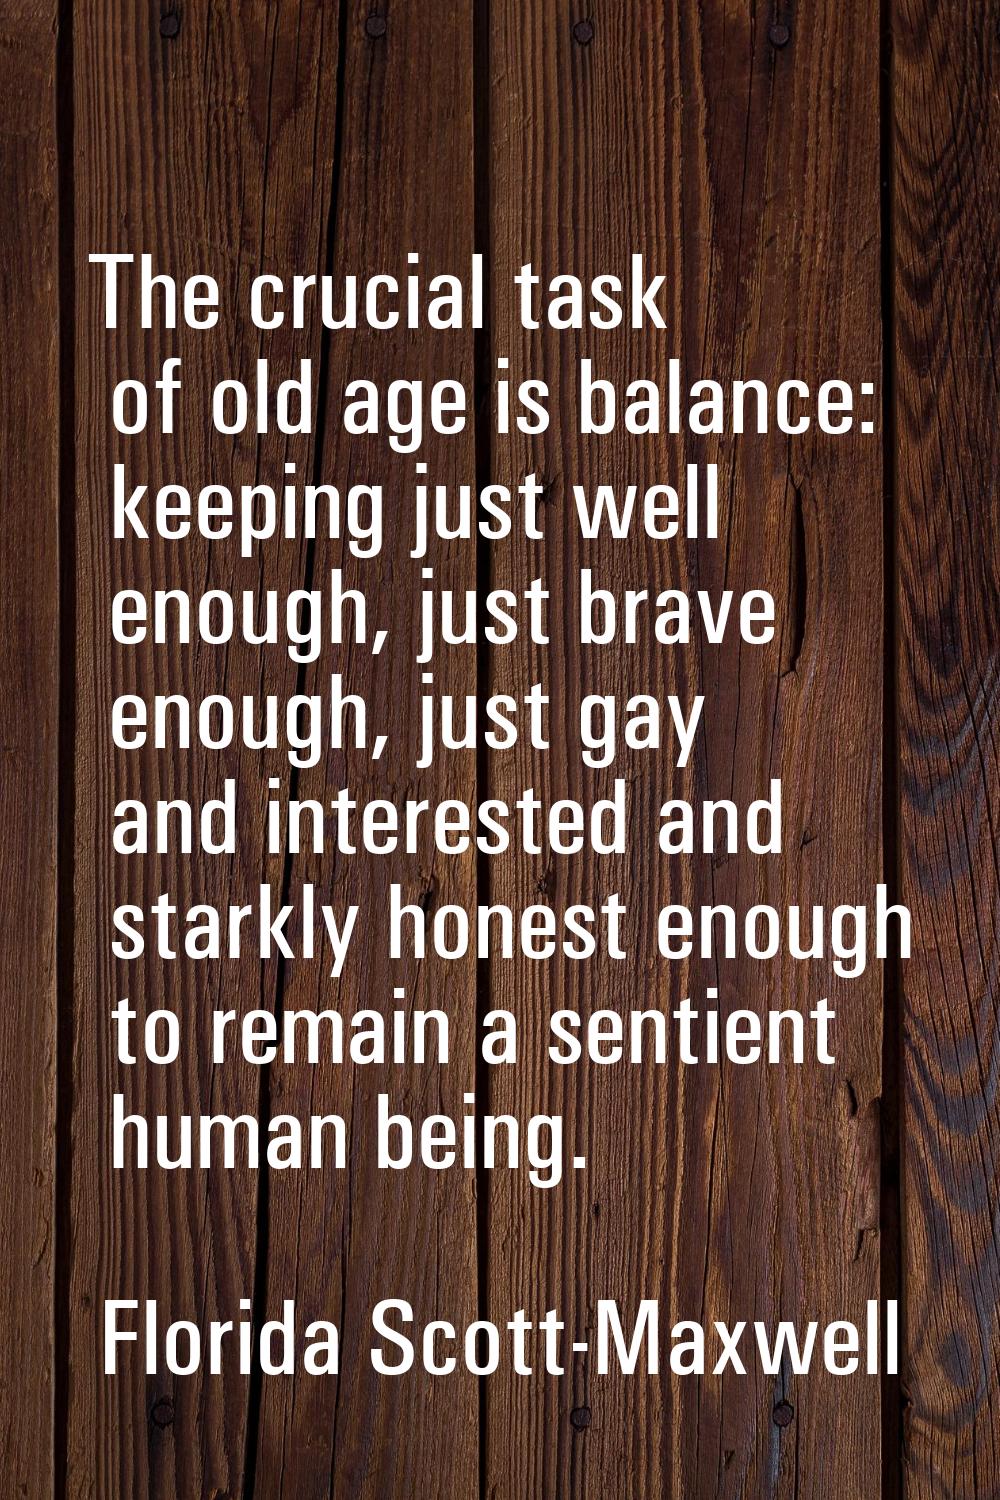 The crucial task of old age is balance: keeping just well enough, just brave enough, just gay and i